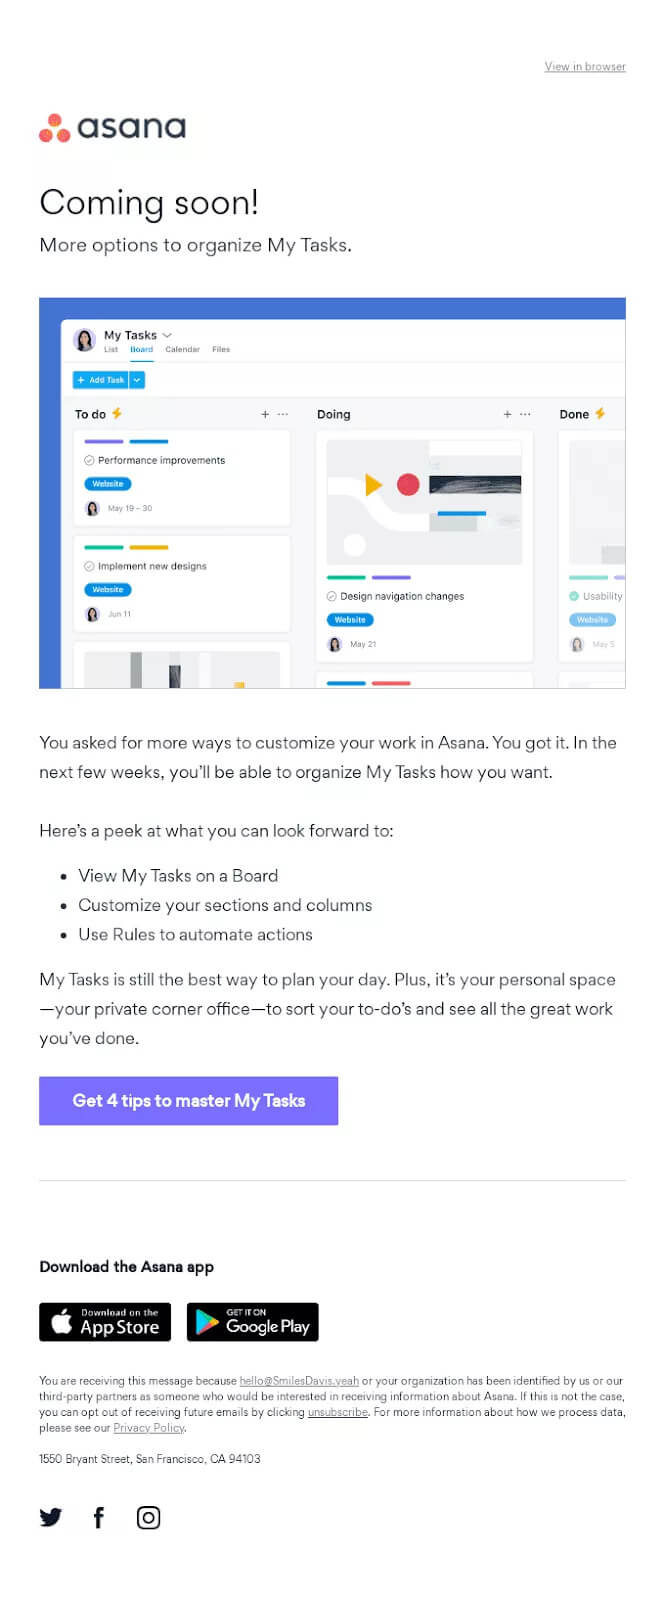 Asana announcing its new feature